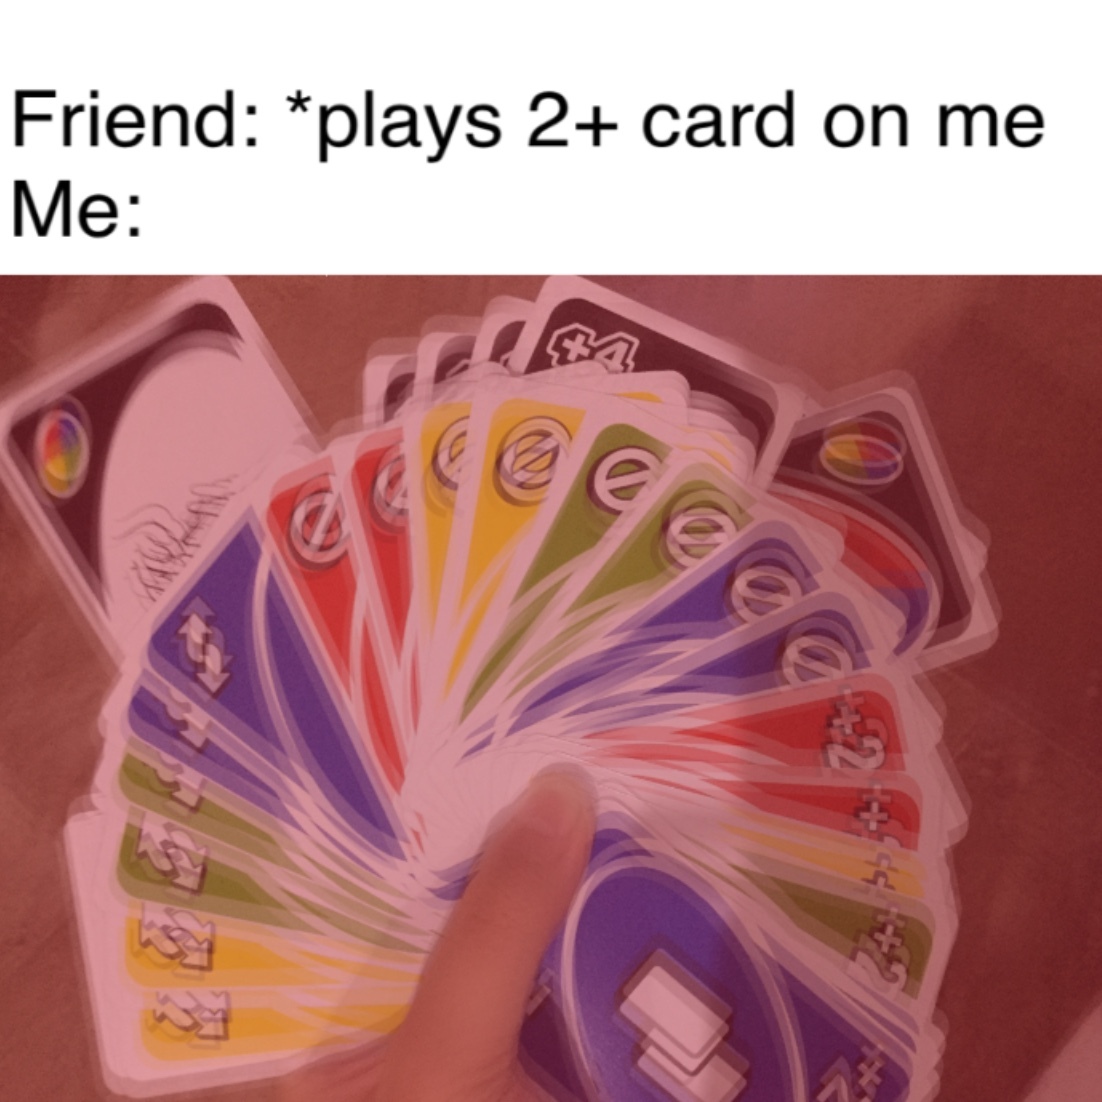 uno,uno card,Uno reverse card,oofledoodles,meme,memes,gifs,funny,...